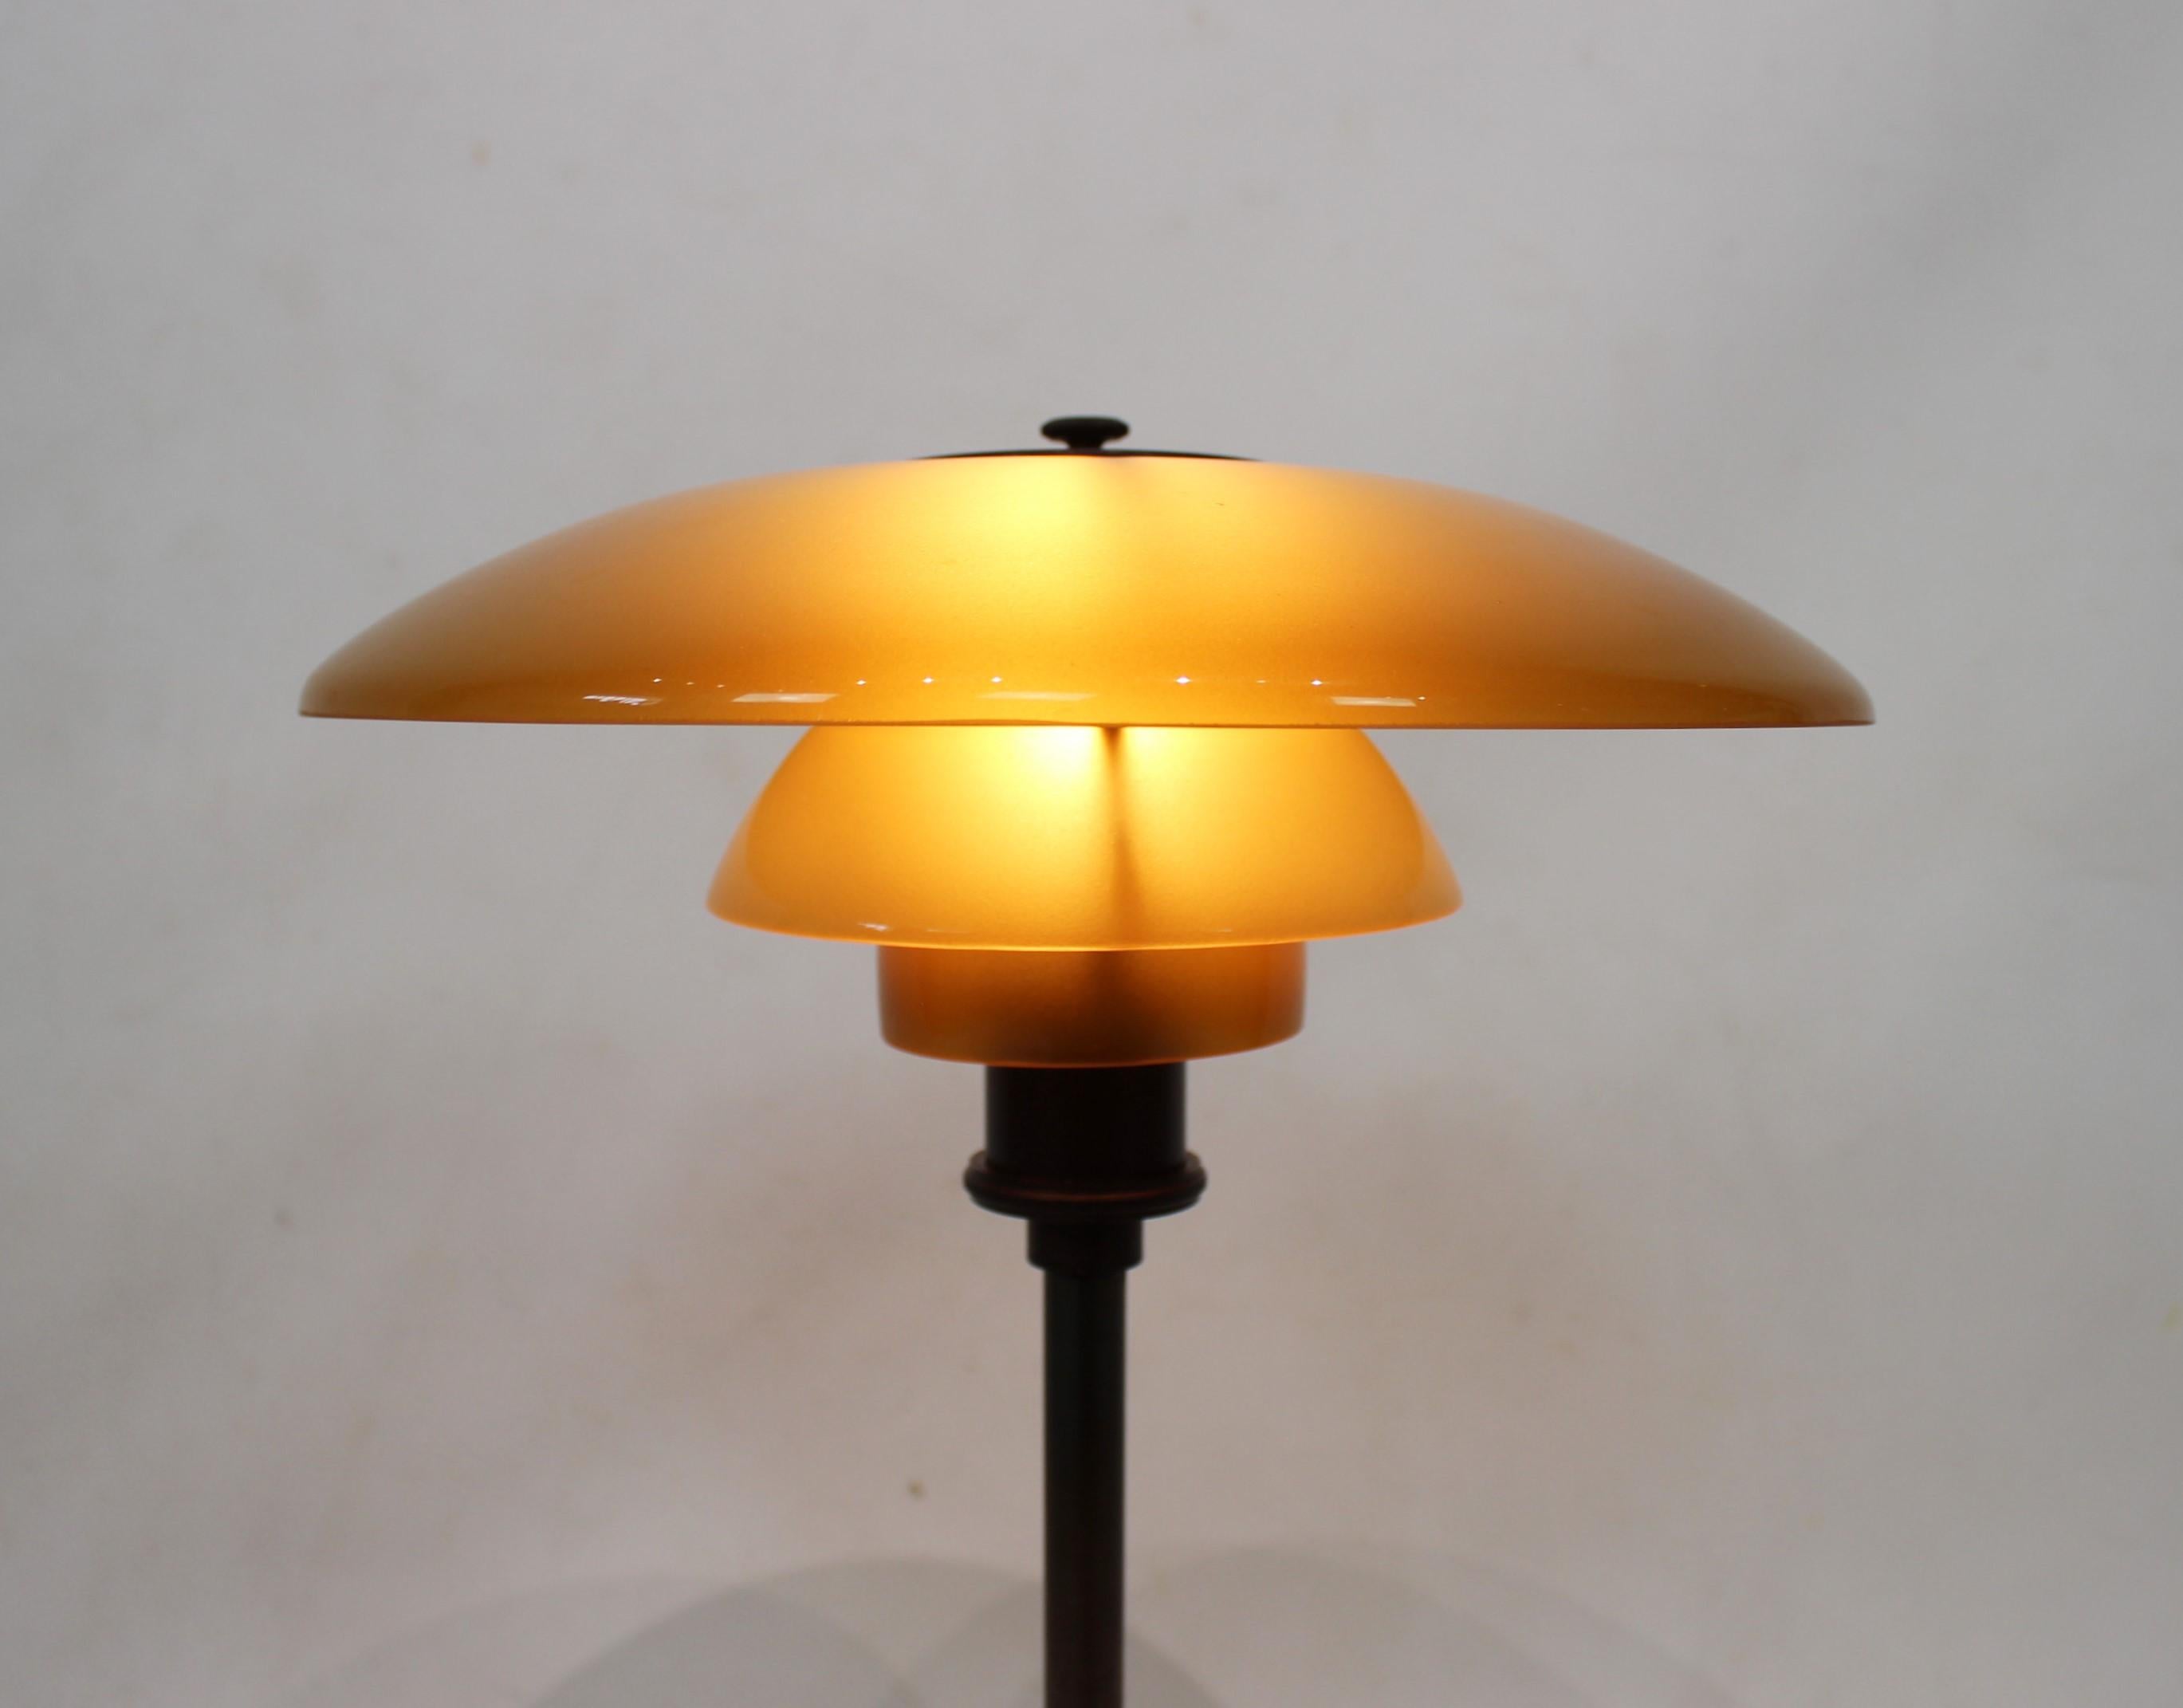 PH 3/2 tablelamp with shades of amber colored glass and frame of burnished brass, designed by Poul Henningsen and manufactured by Louis Poulsen in the beginning of the 1930s. The lamp is in great vintage condition.
Measures: Height 47 cm and